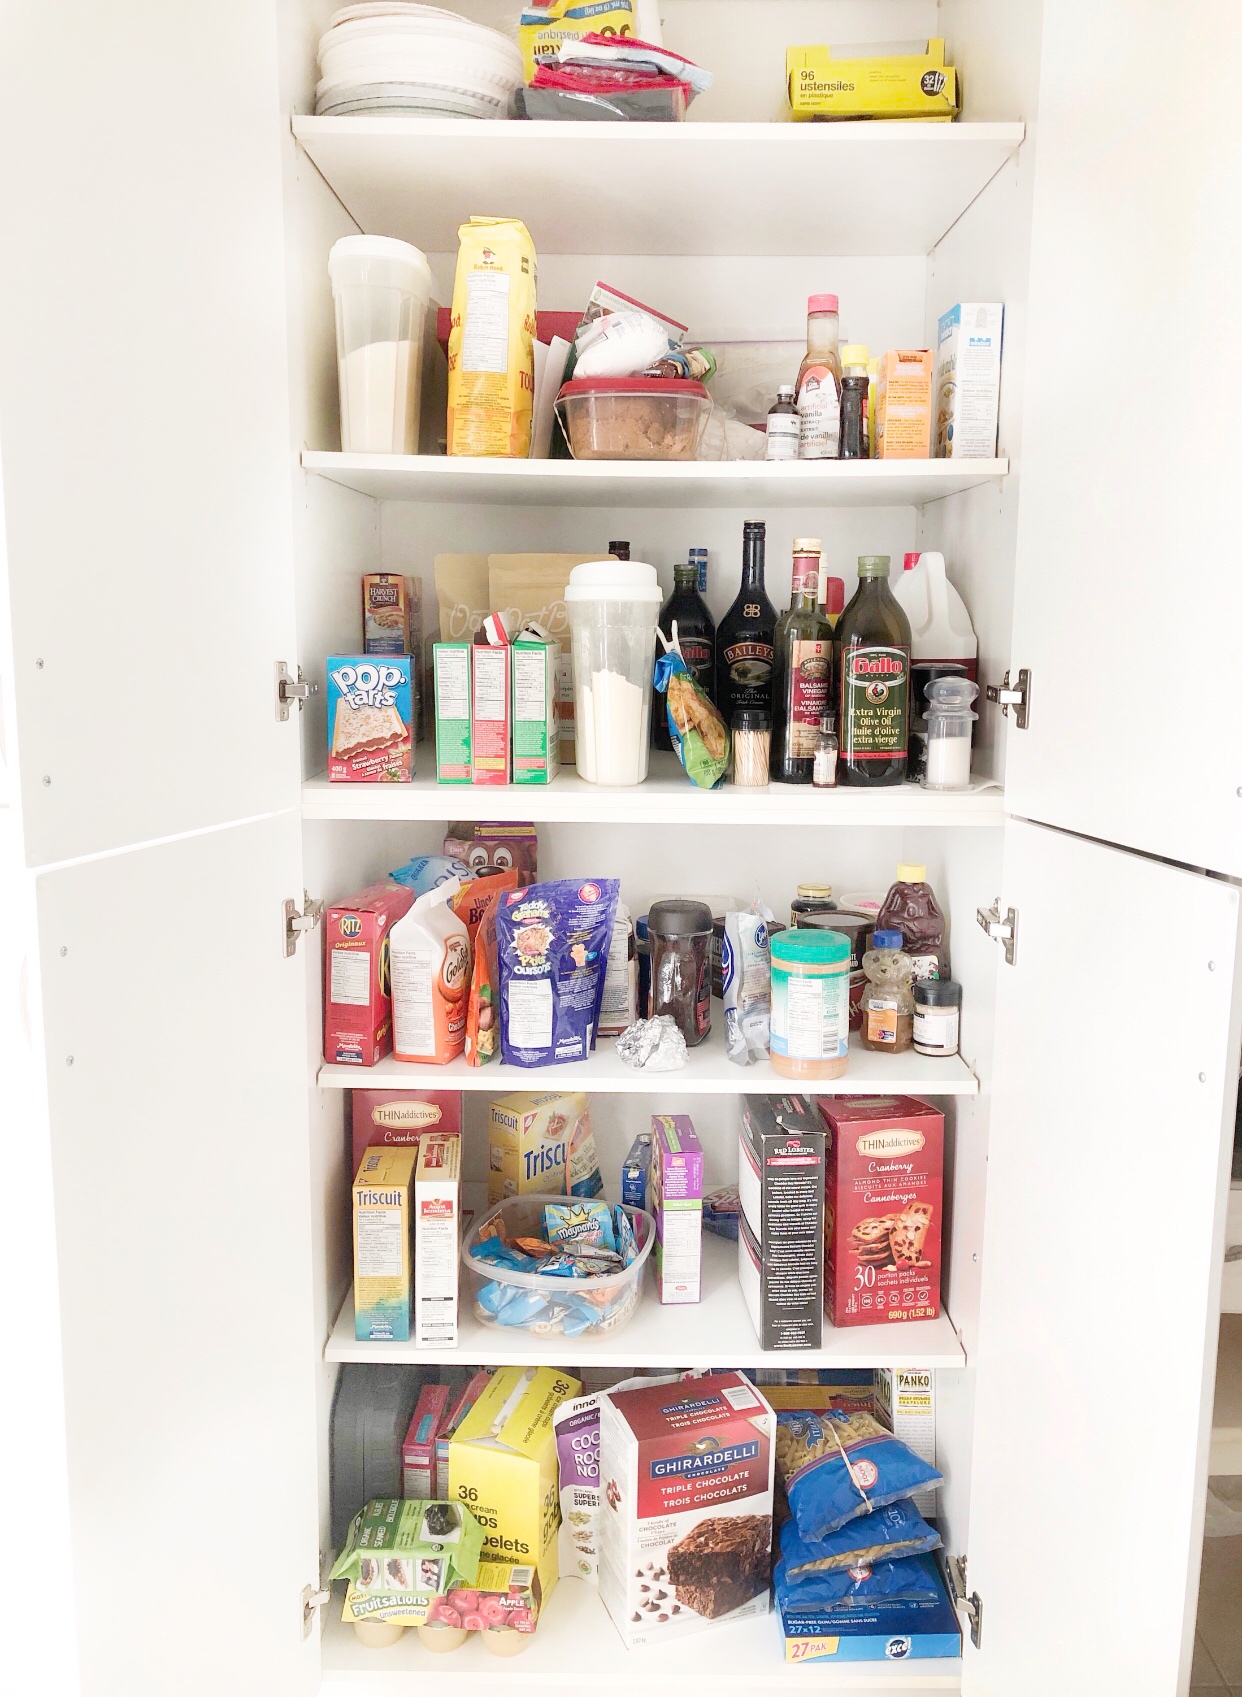 Kitchen Pantry Organization on Livin' Life with Style(Before)